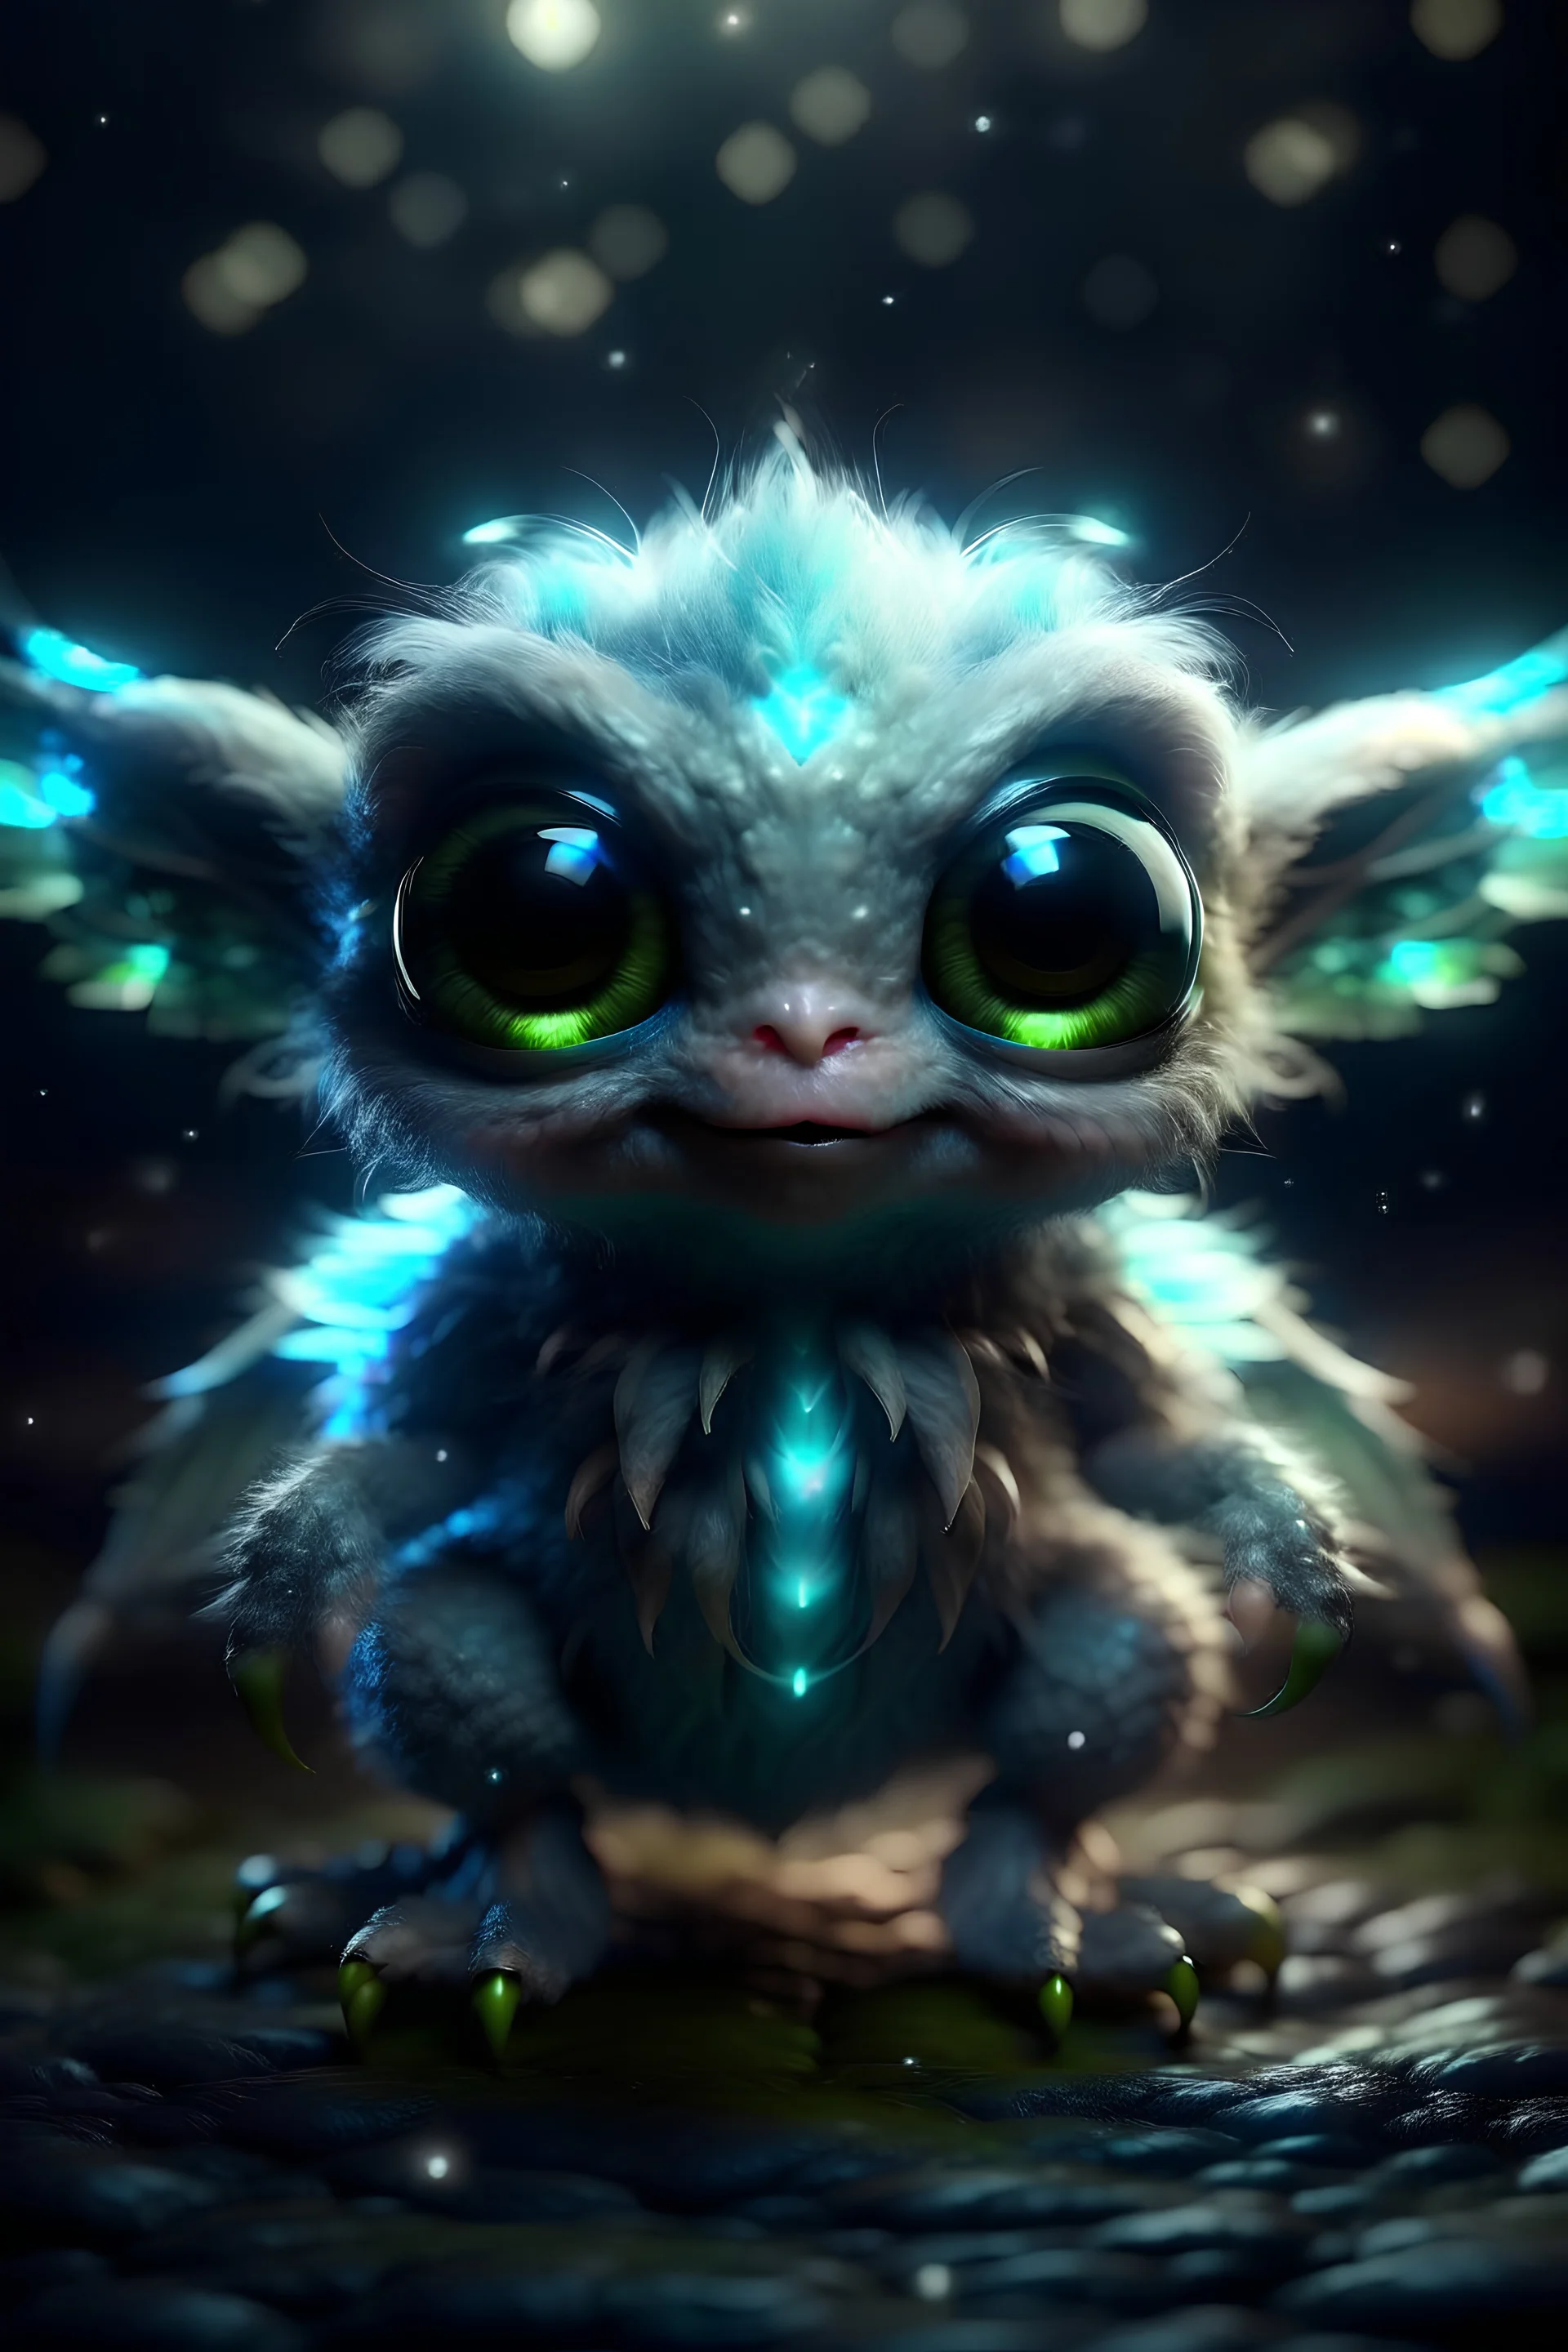 An adorable extraterrestrial creature with fluffy wings and sparkly antennae.